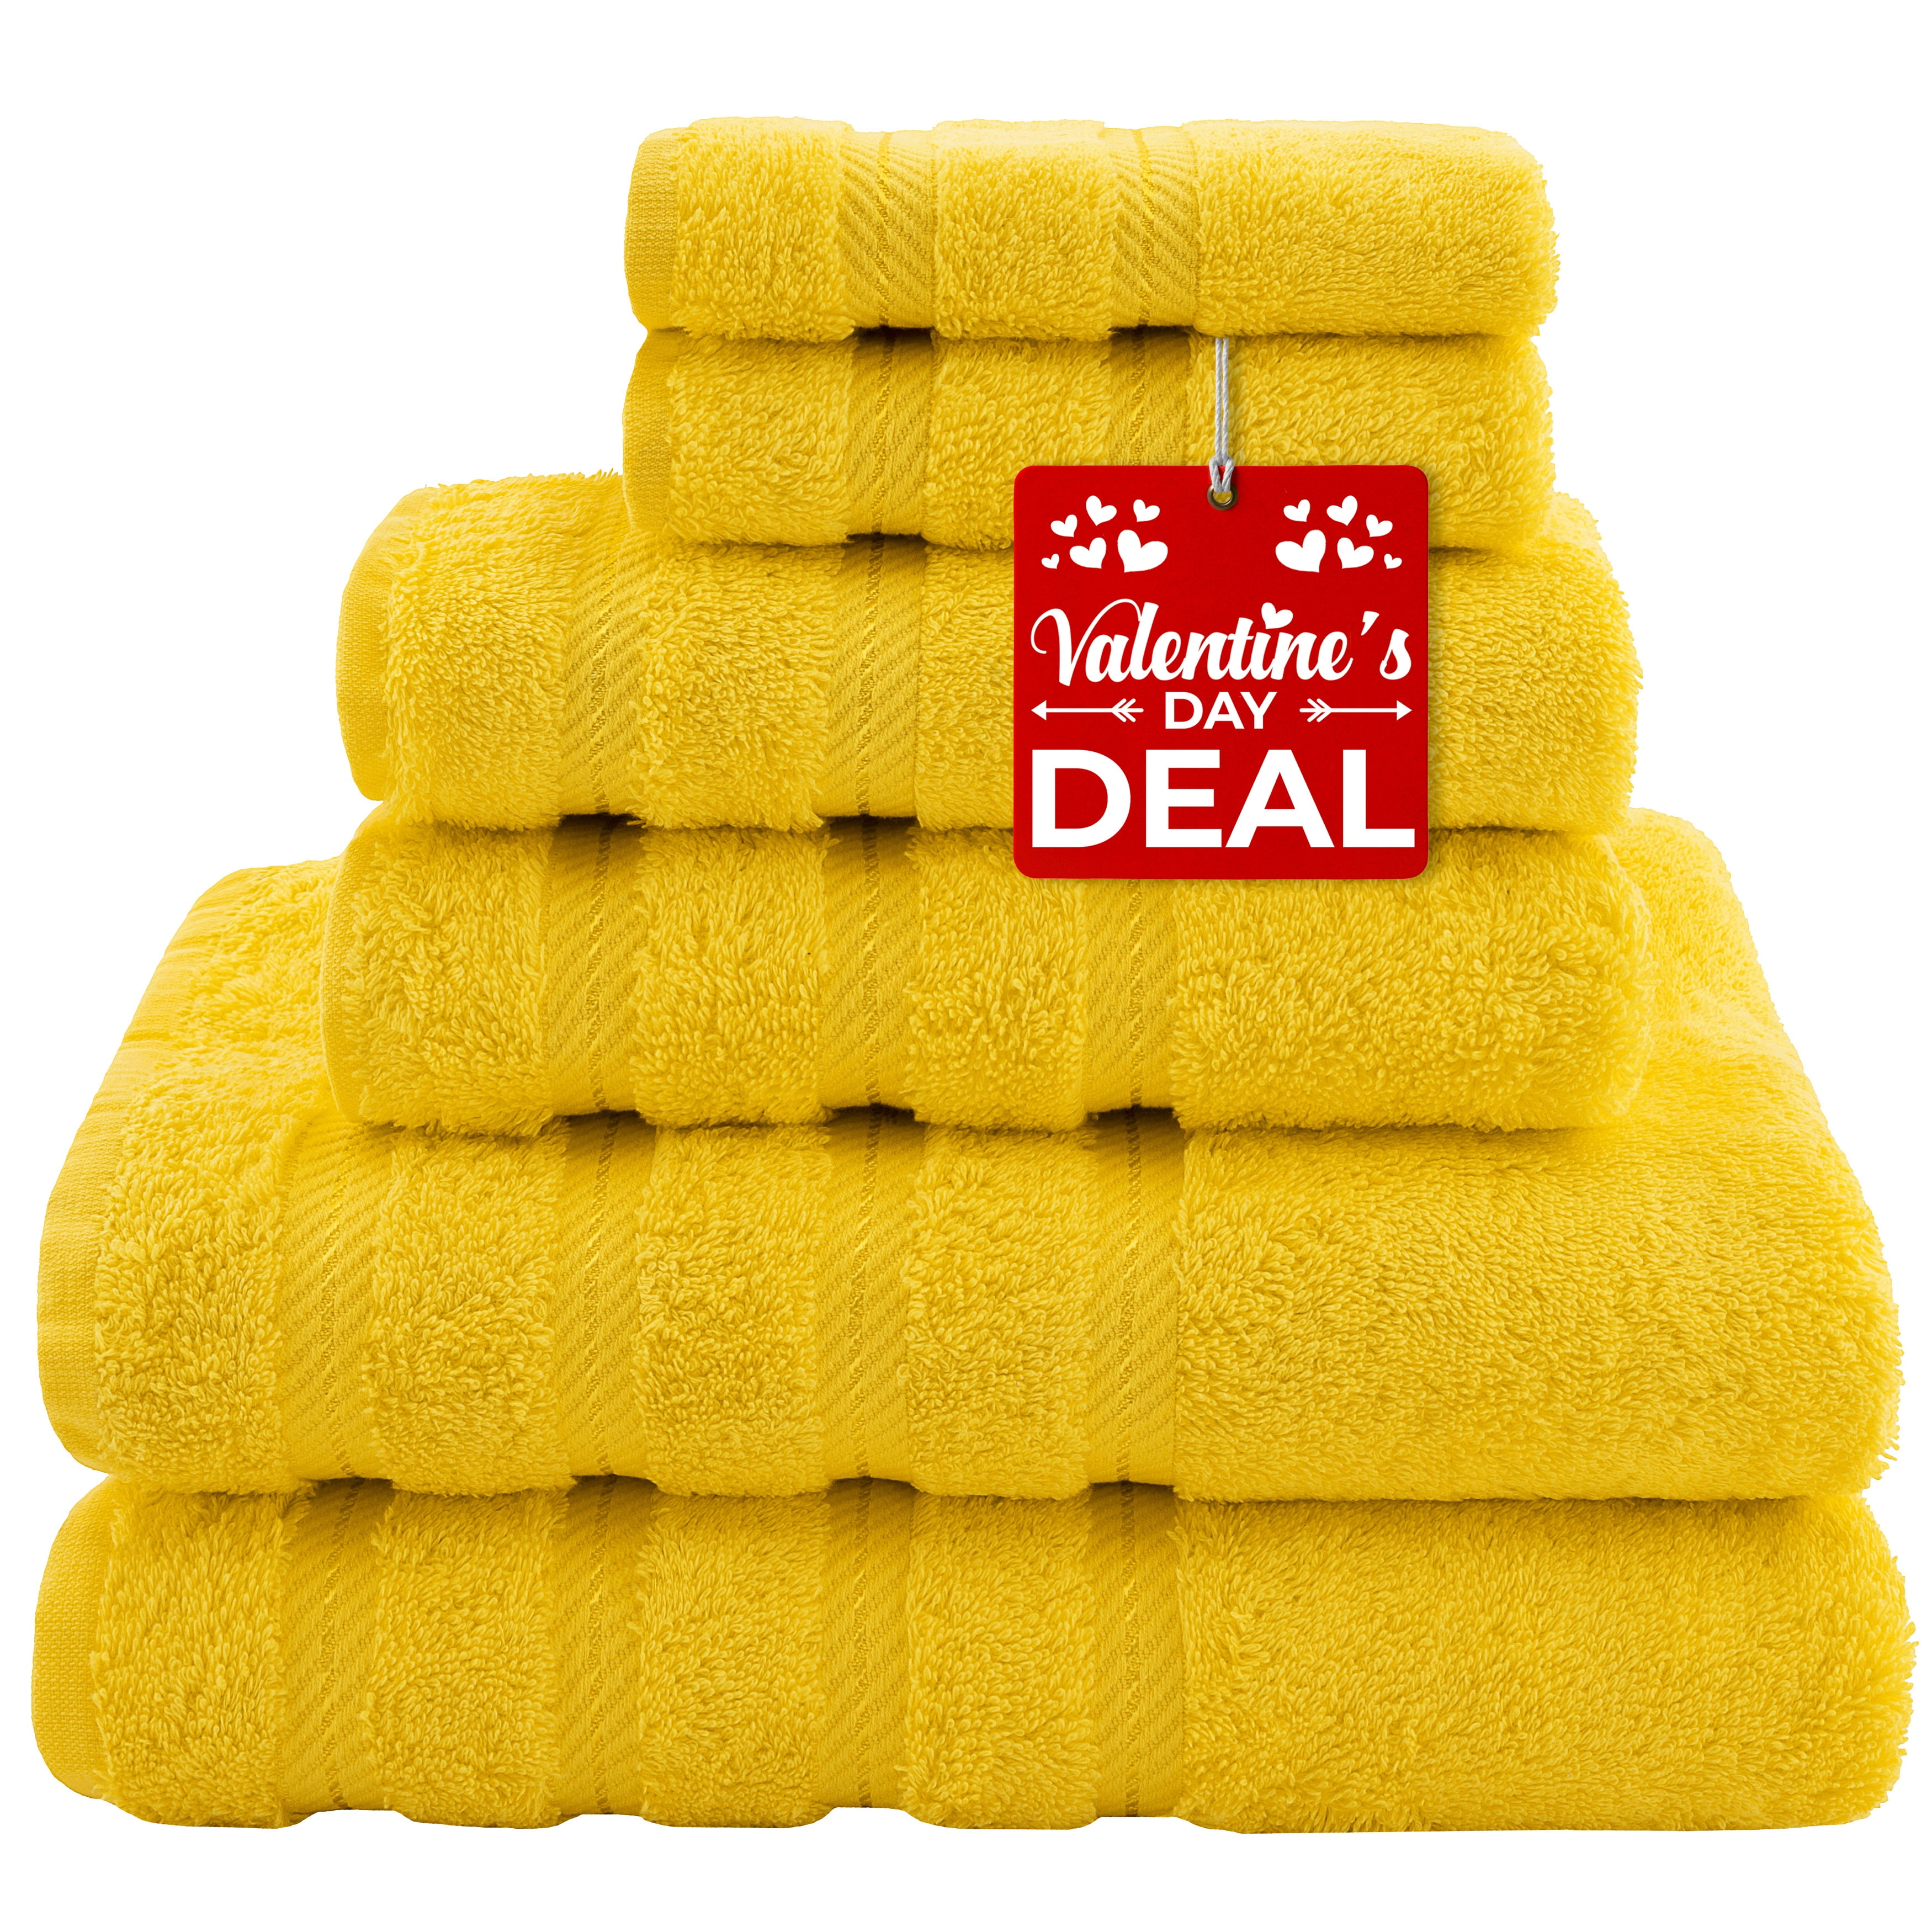 Luxury 6 Piece Hotel and SPA Towel Set Soft and Thick Bath Towels Made with  100% Turkish Cotton 2 Bathtowels 2 Handtowels 2 Was - China Wholesale  Cotton Hotel Towel Set and